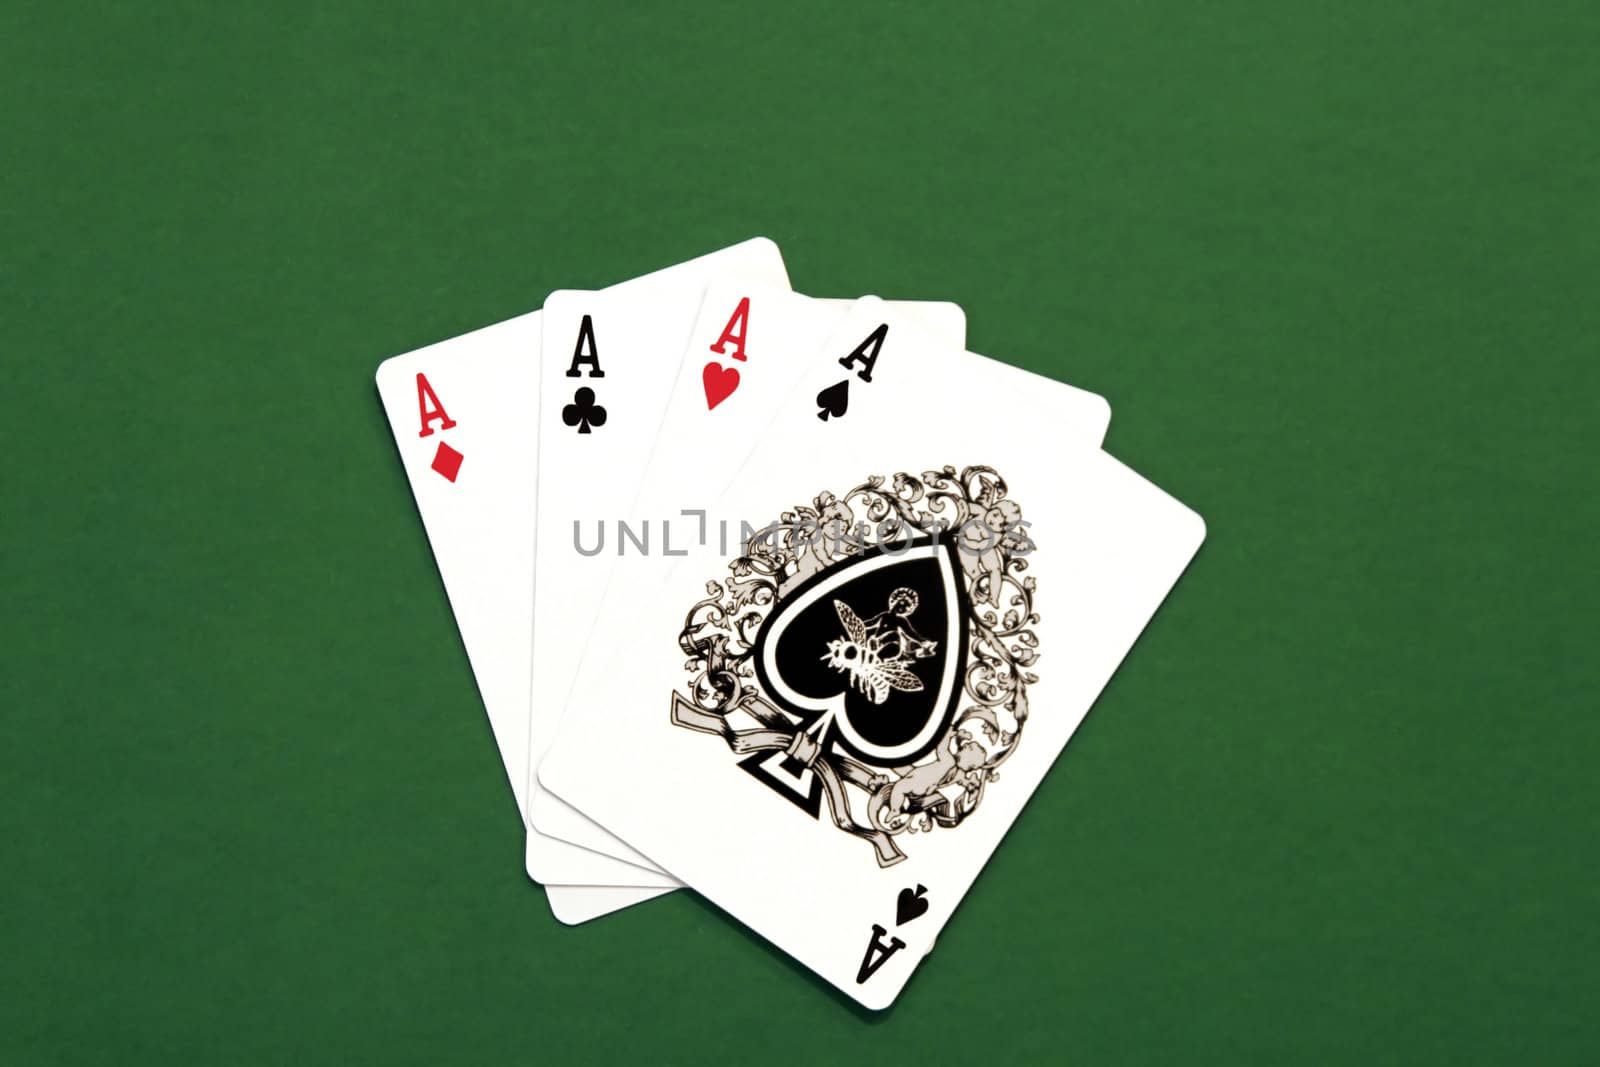 Four Aces - Green Background